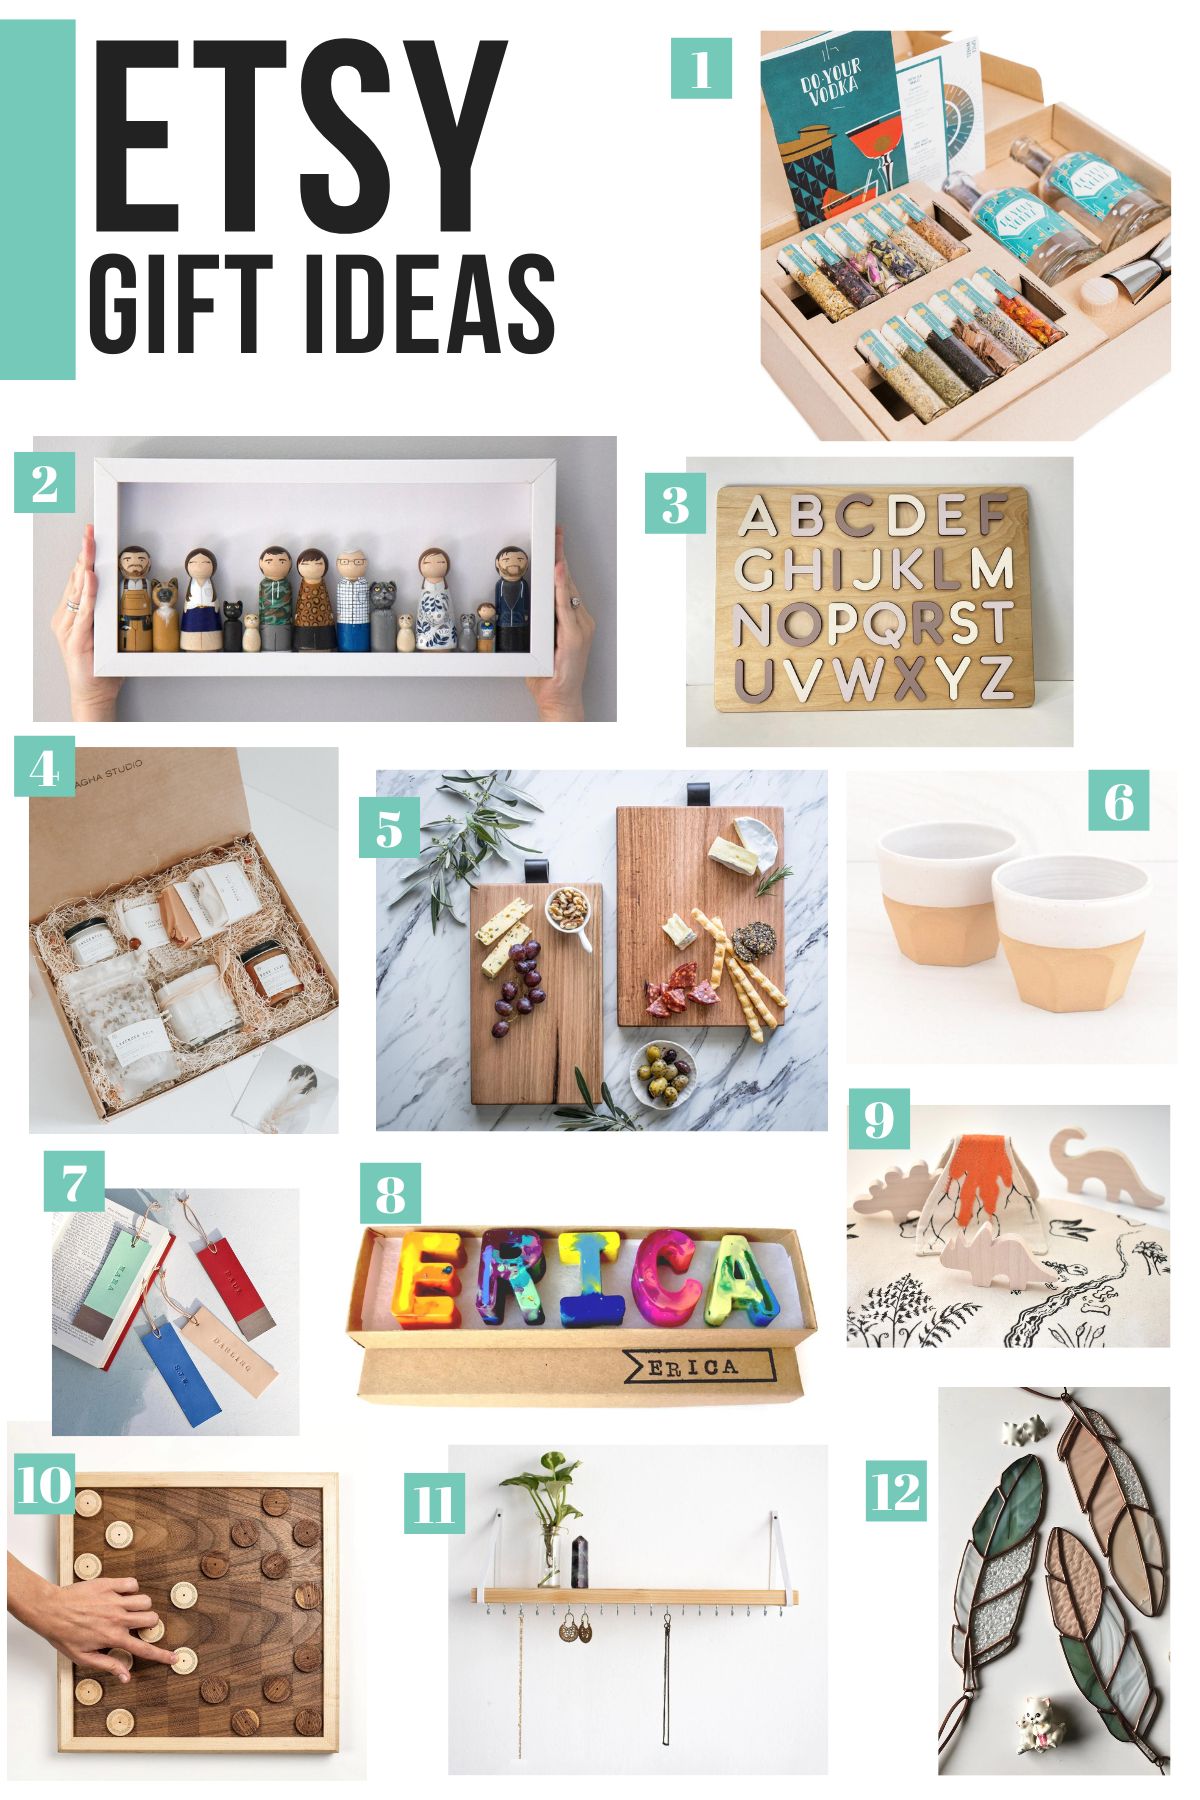 Numbered photo collage of items found on Etsy with text overlay that reads "Etsy Gift Ideas".